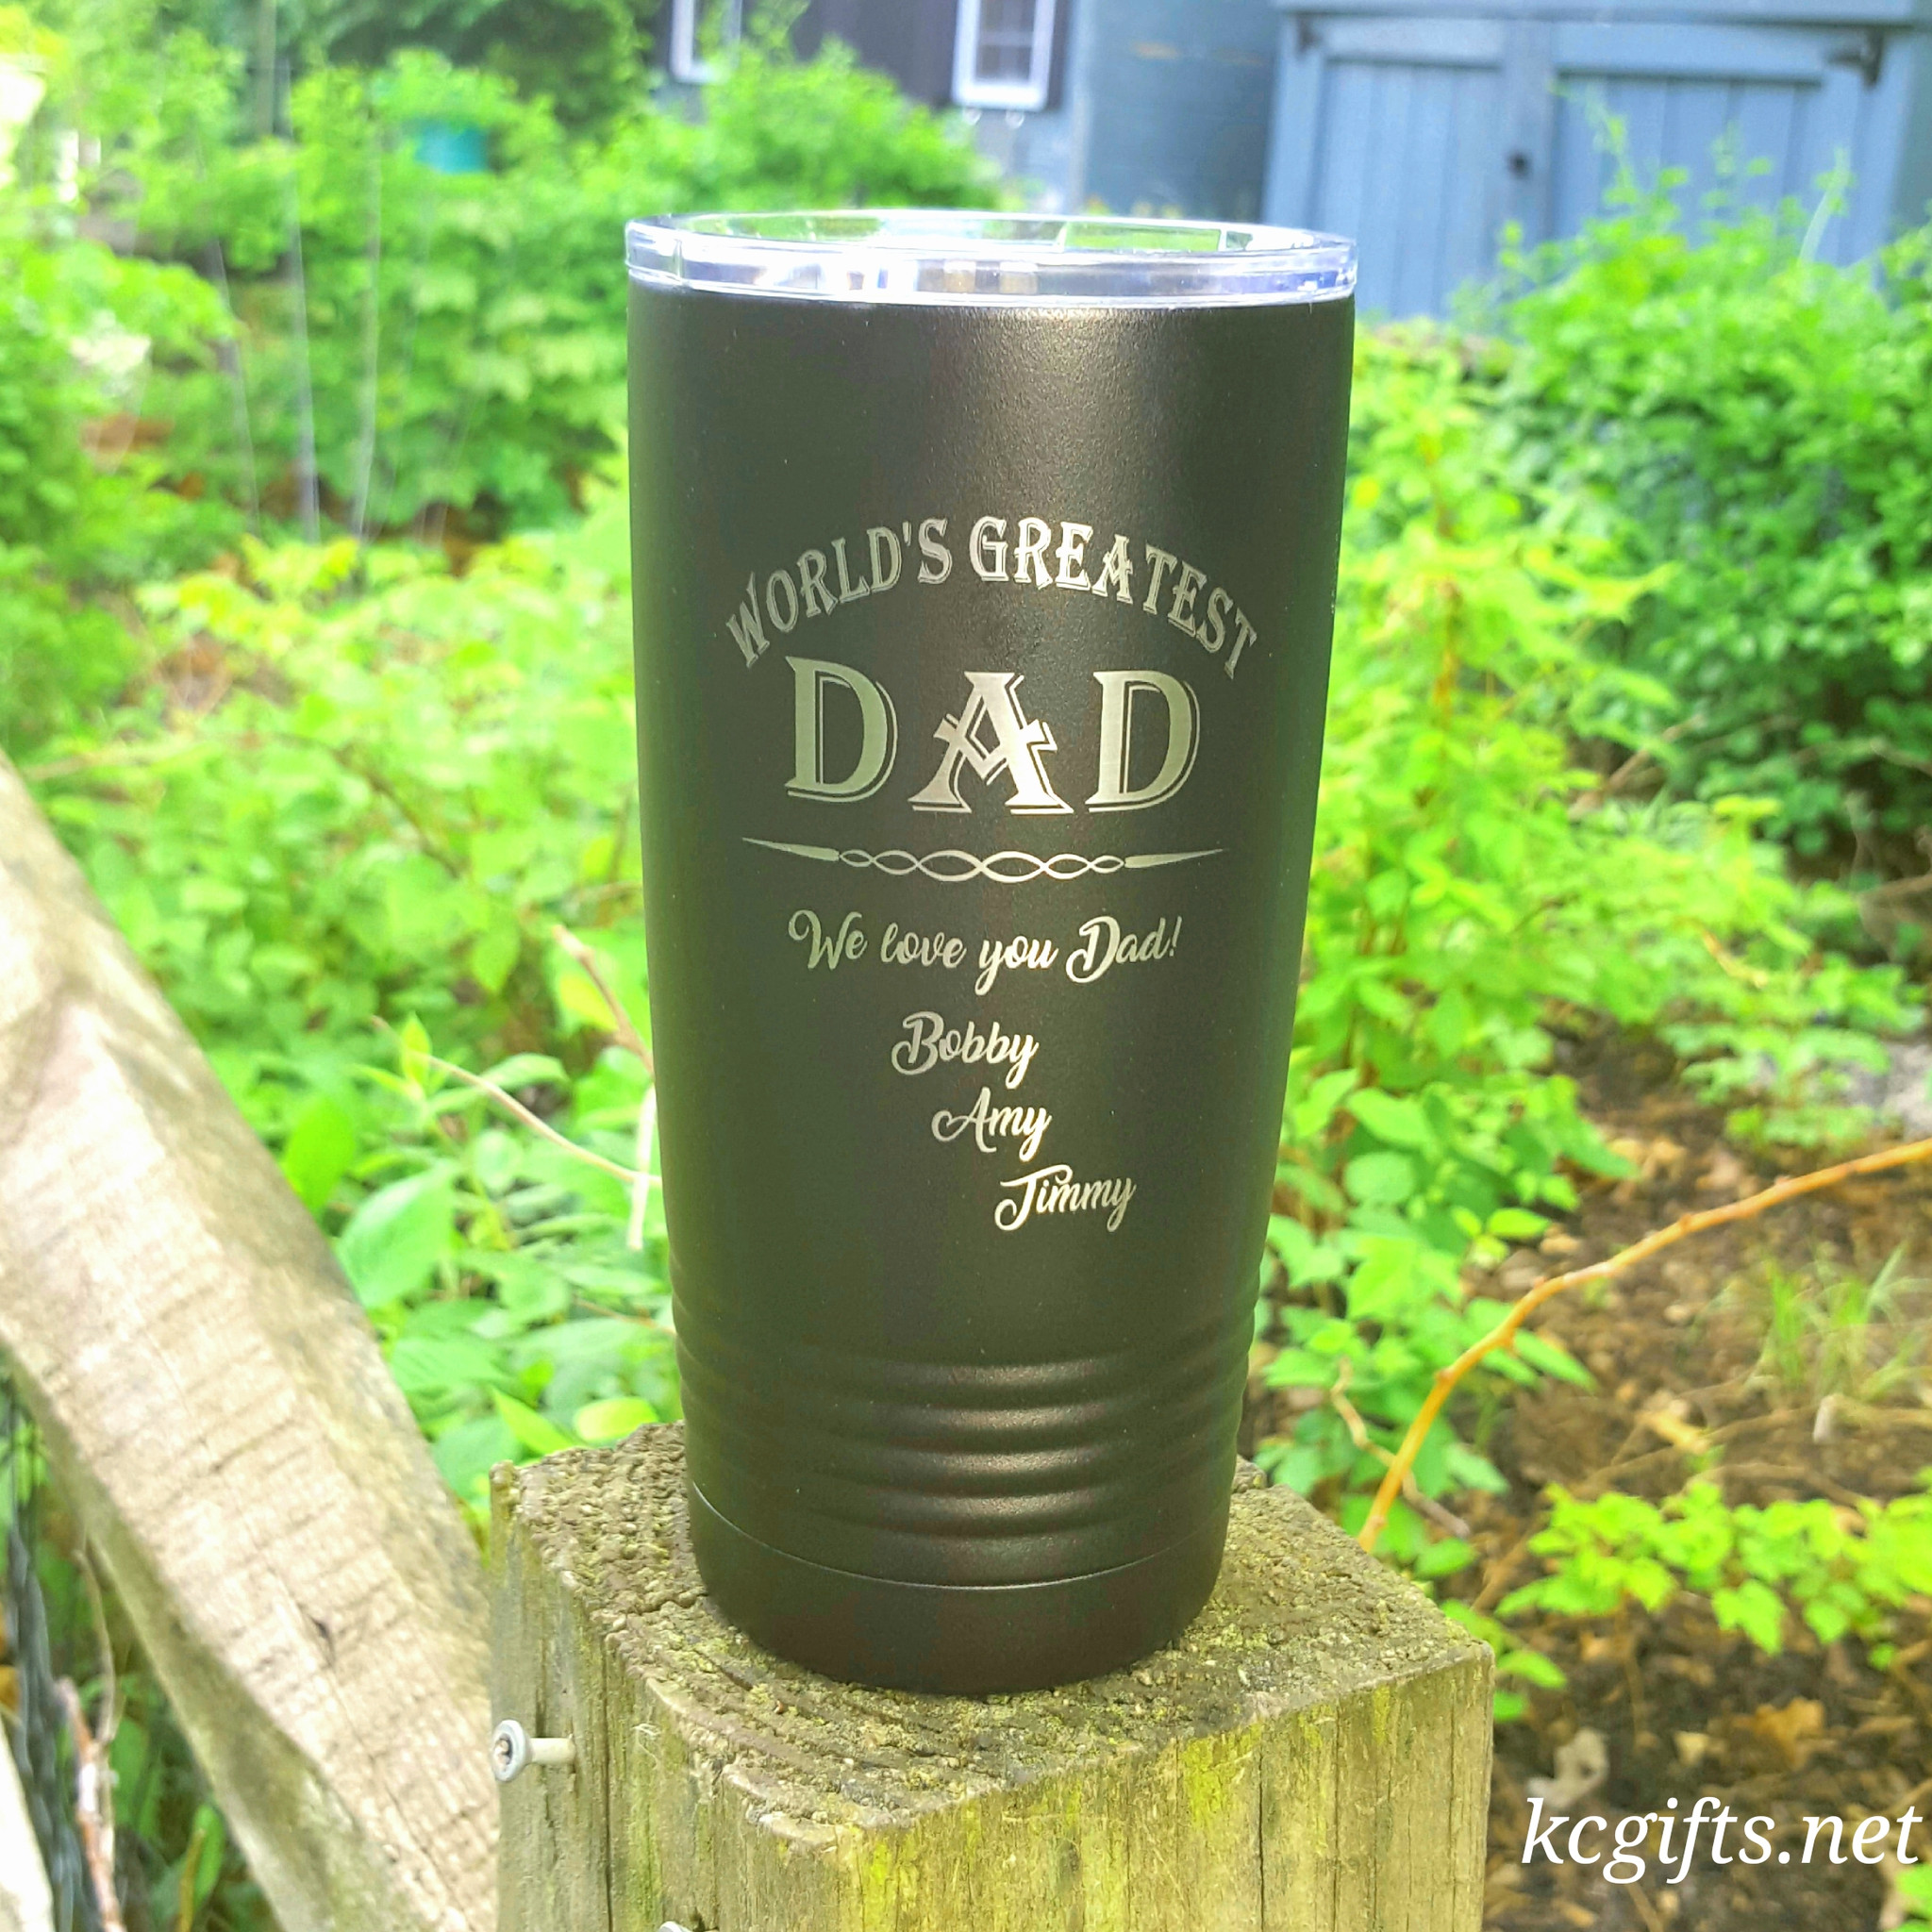 Polar Camel Insulated Mug - World's Greatest Dad - Personalized Engraved  Polar Camel YETI Clone - for the GREATEST DAD EVER! - Killorglin Creations